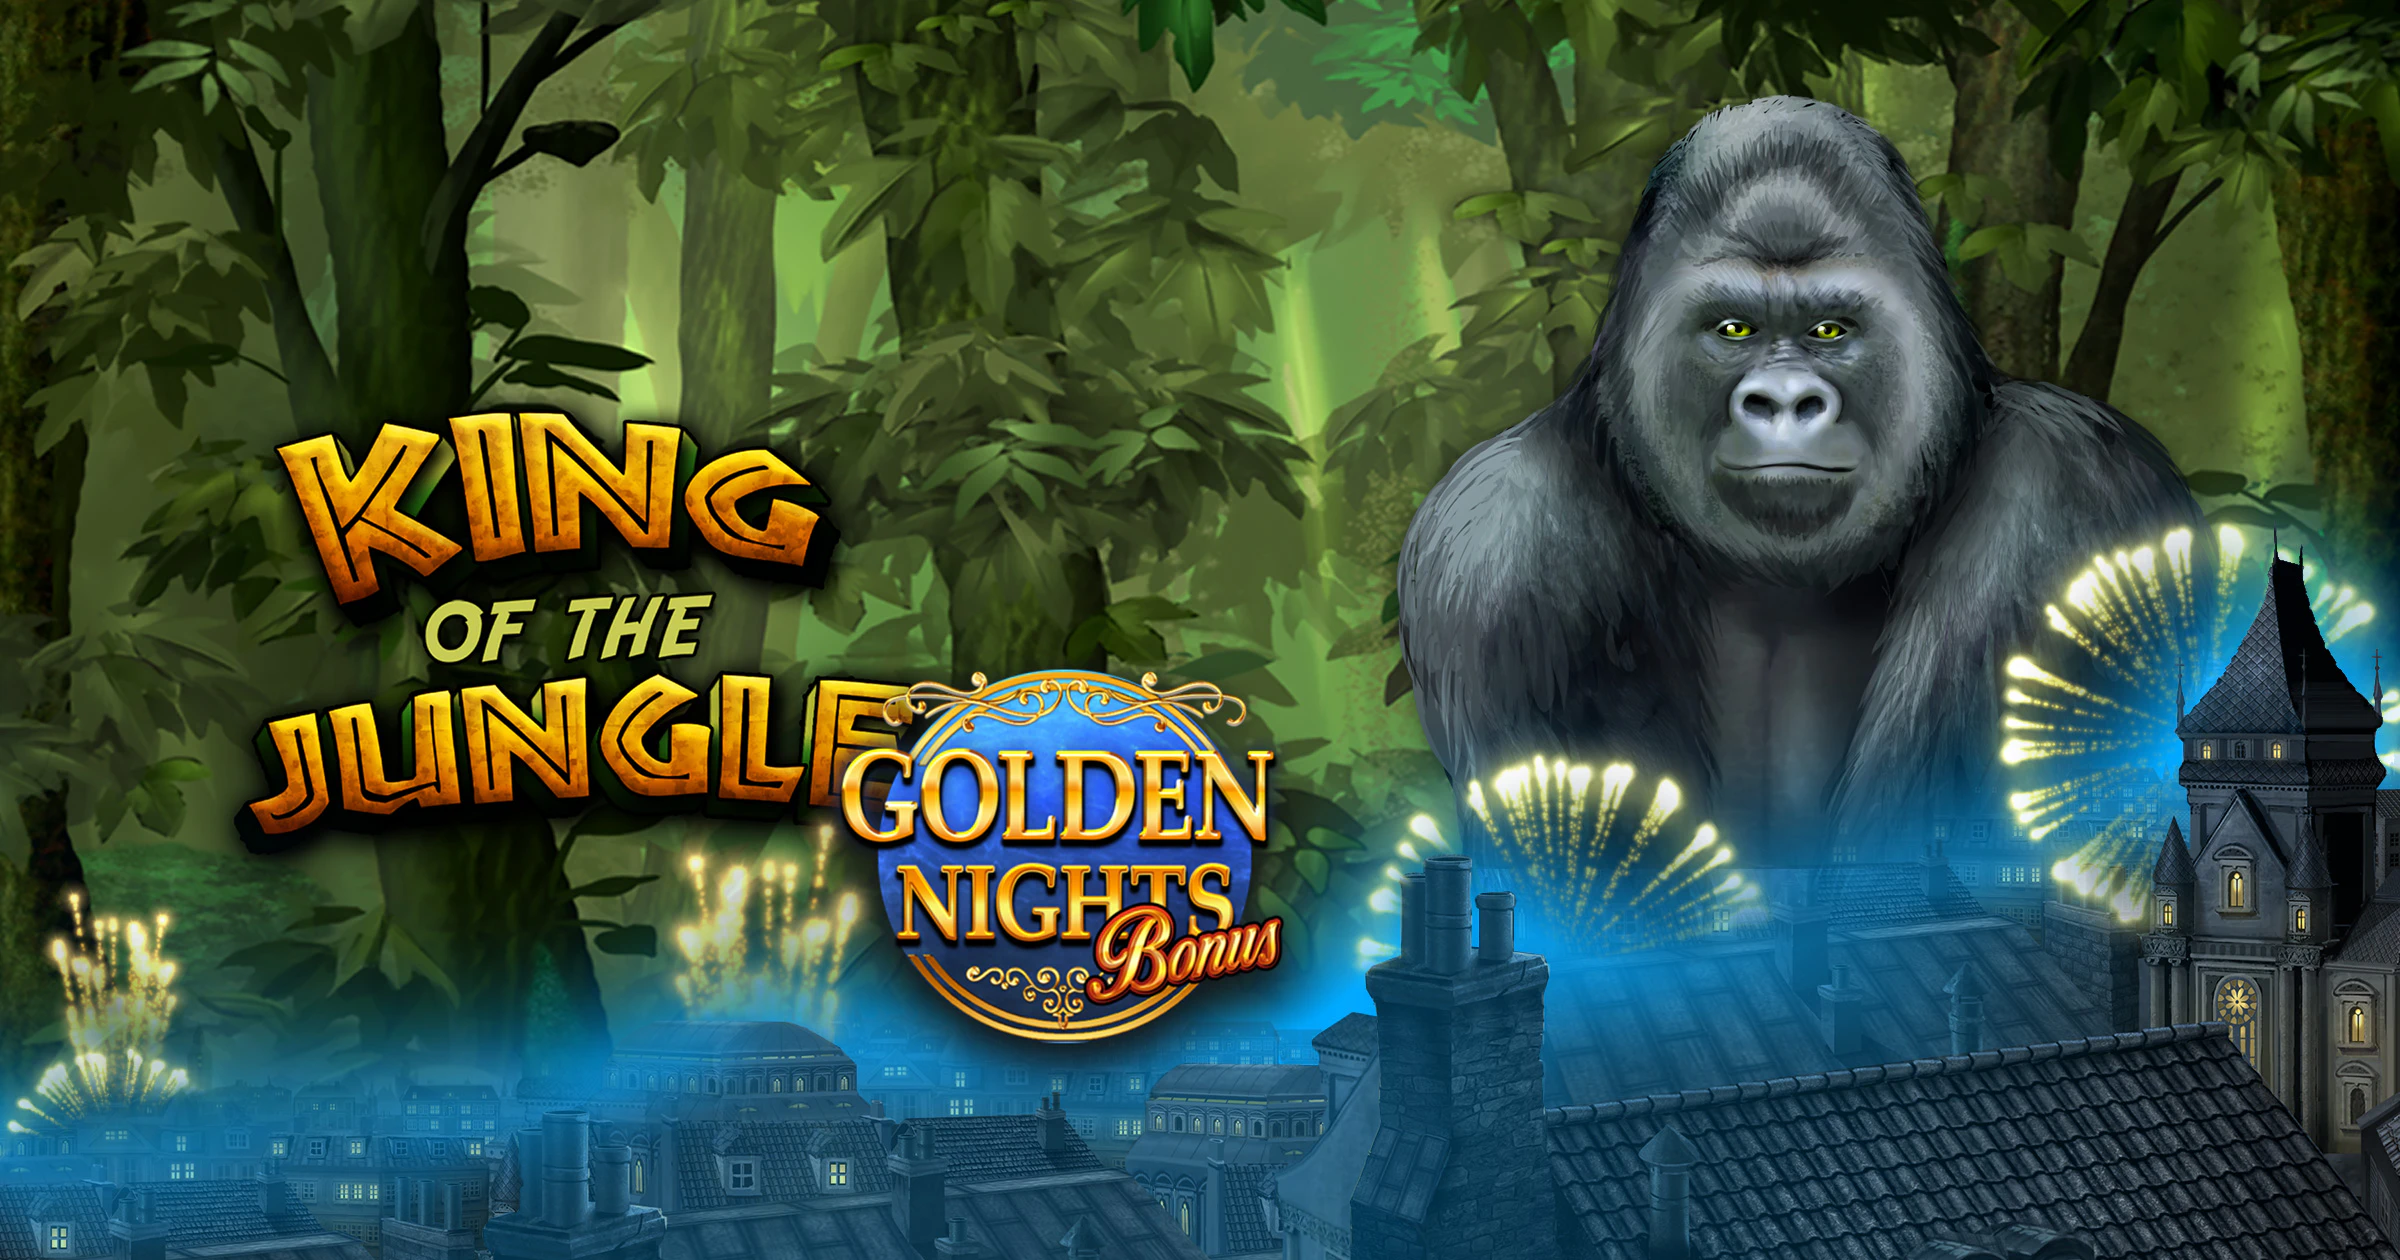 King of the Jungle Golden Nights